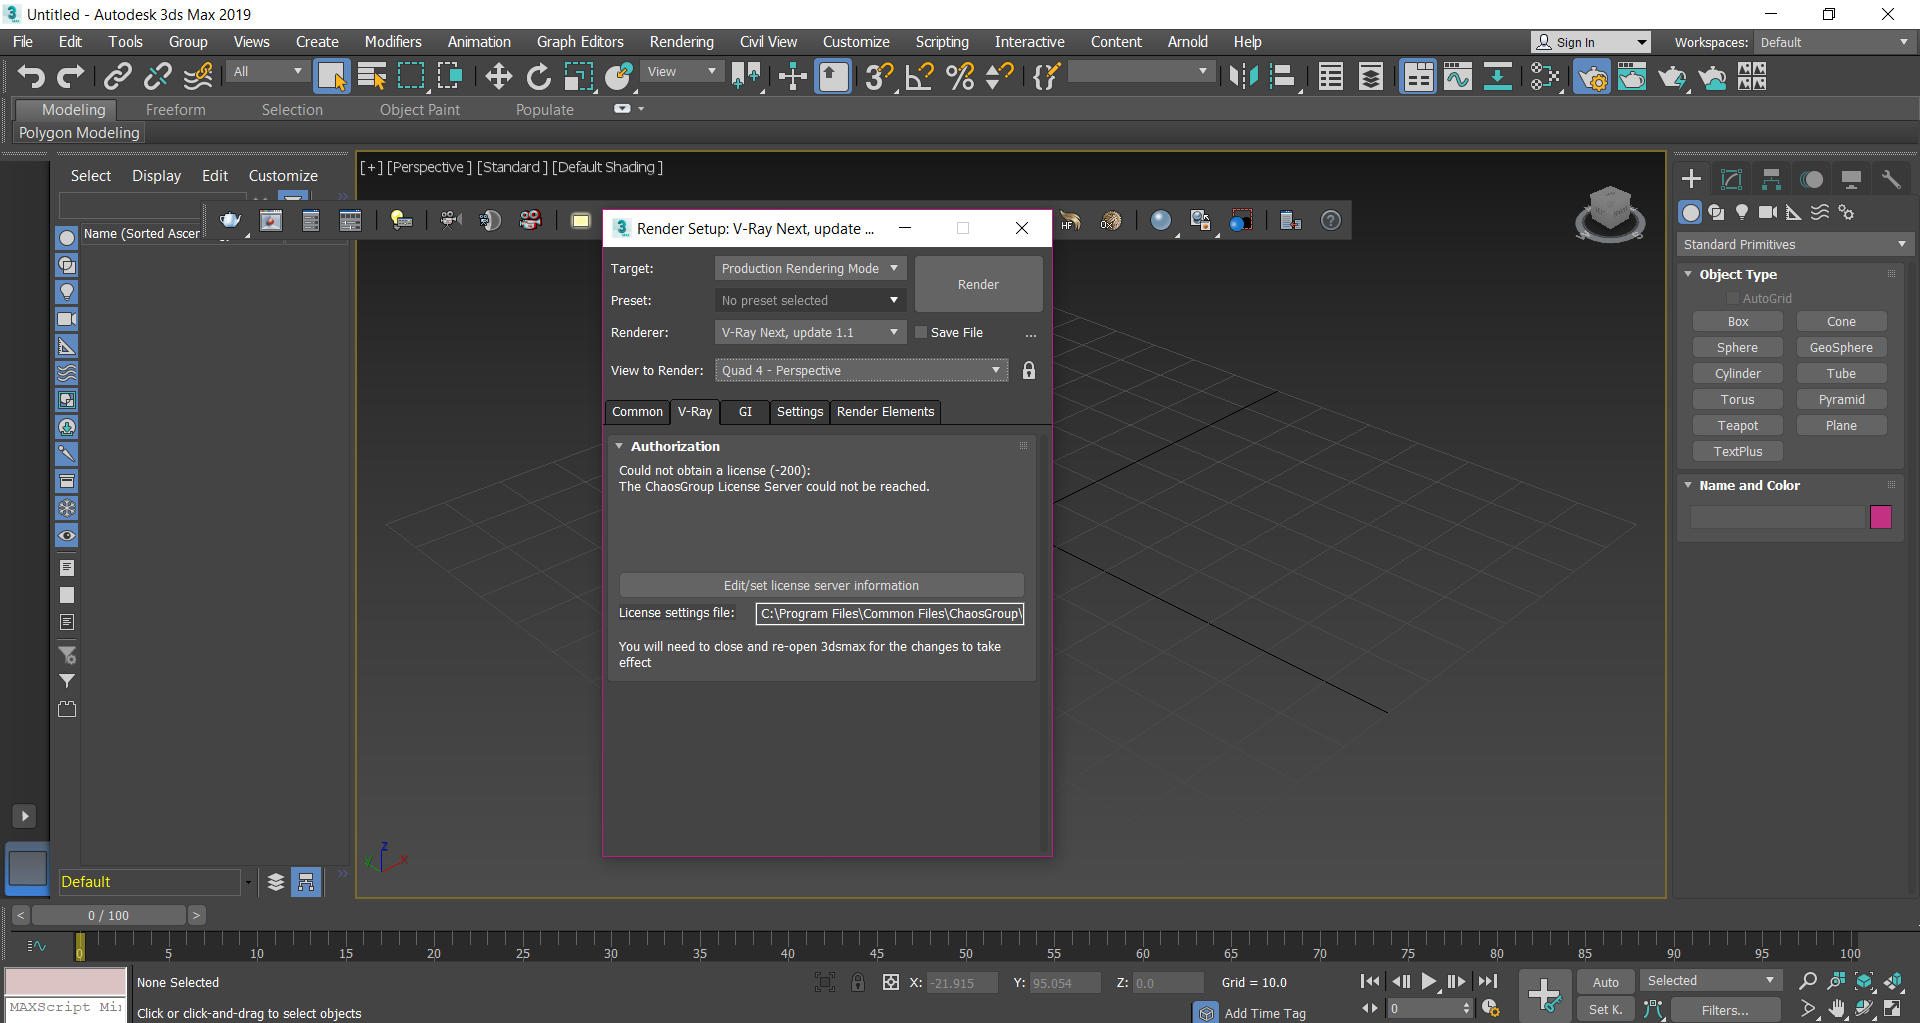 Solved: vray next Didn't work 3Ds MAX Autodesk - 3ds Max